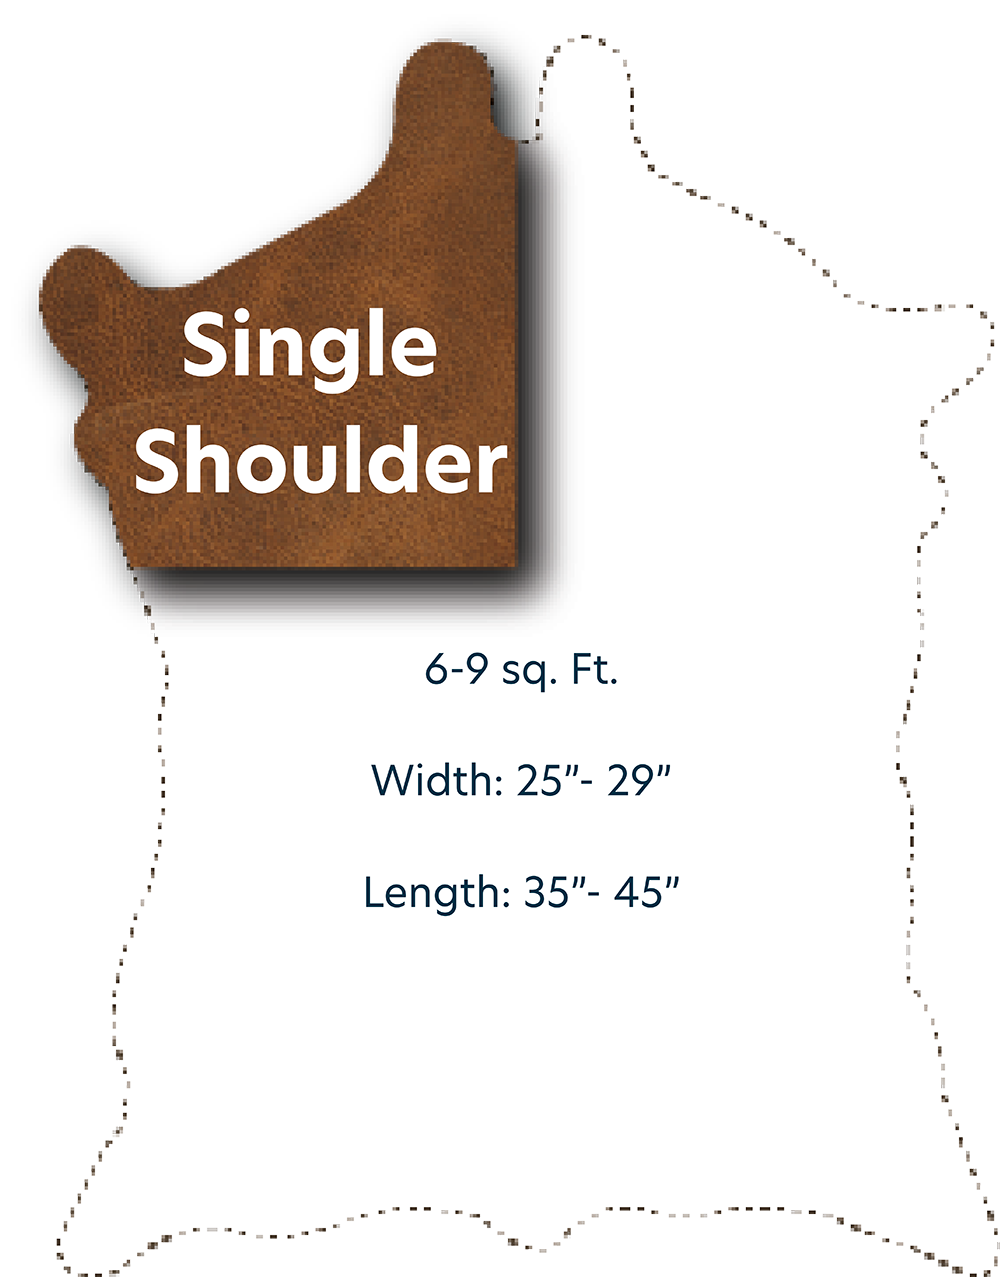 Single Shoulder with Dimensions